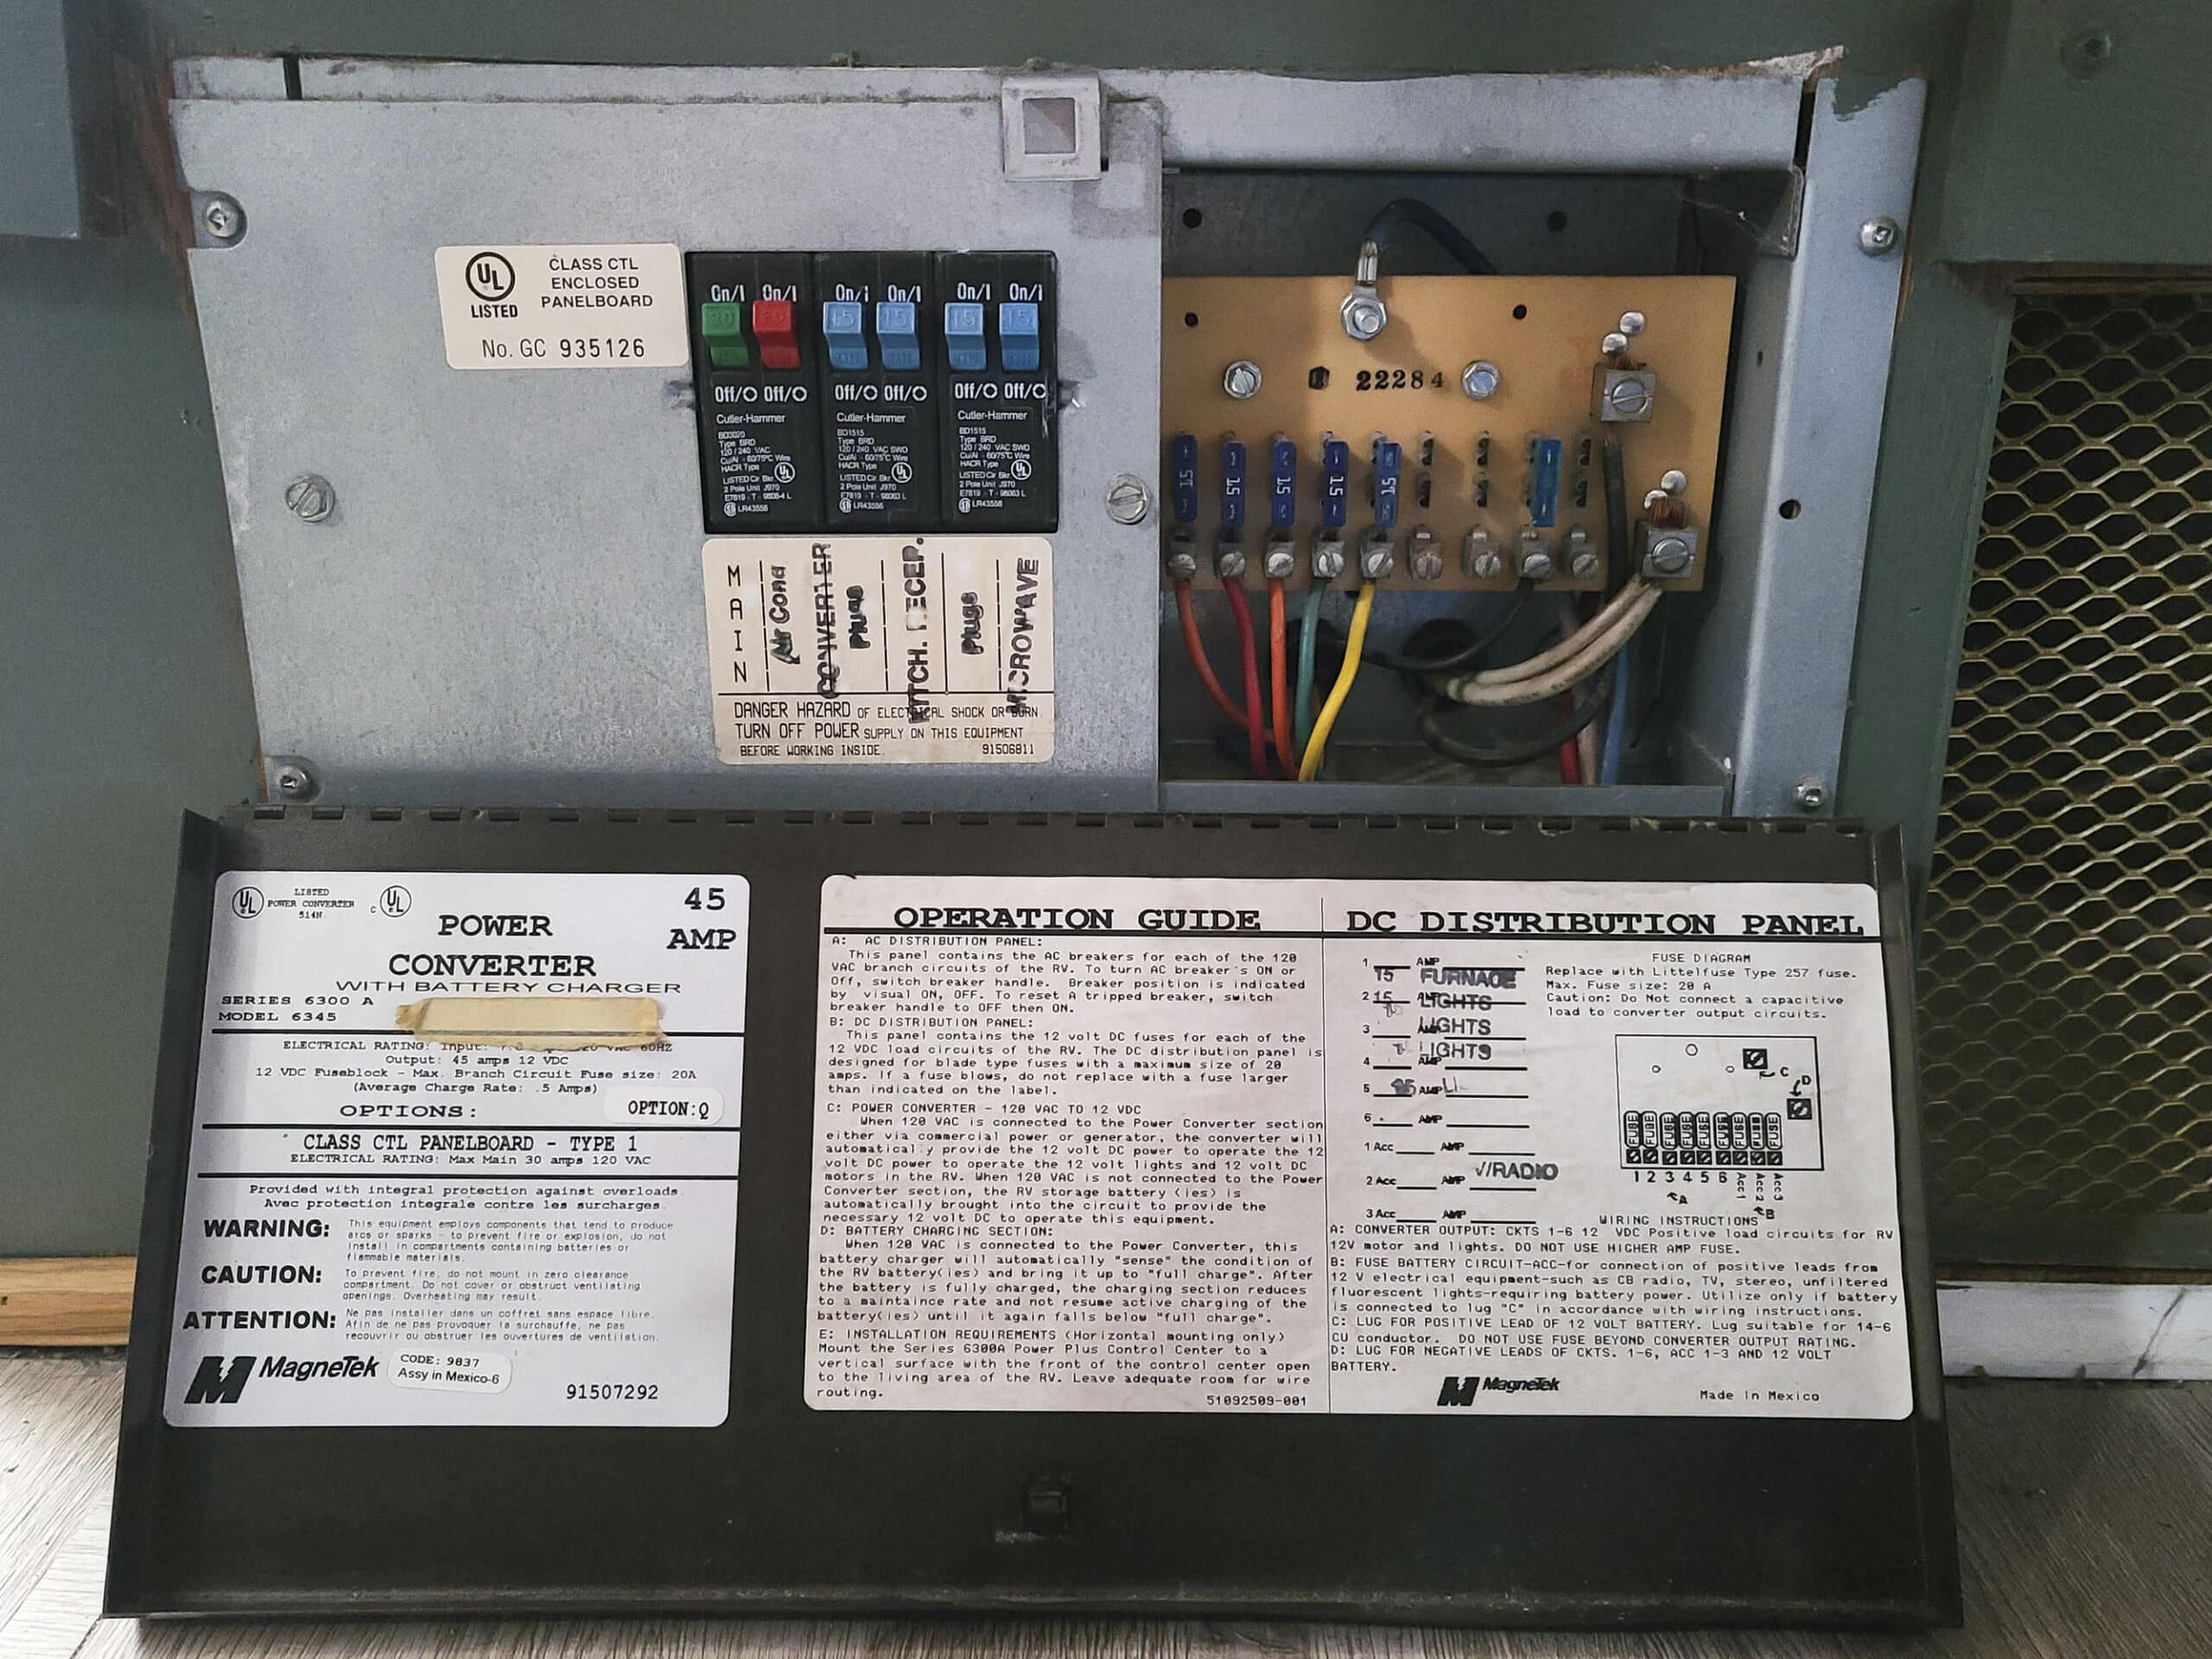 The front panel of an RV electrical box and power converter.  Circuit breakers are on the left, fuses are on the right, and the bottom contains instructions and specifications.